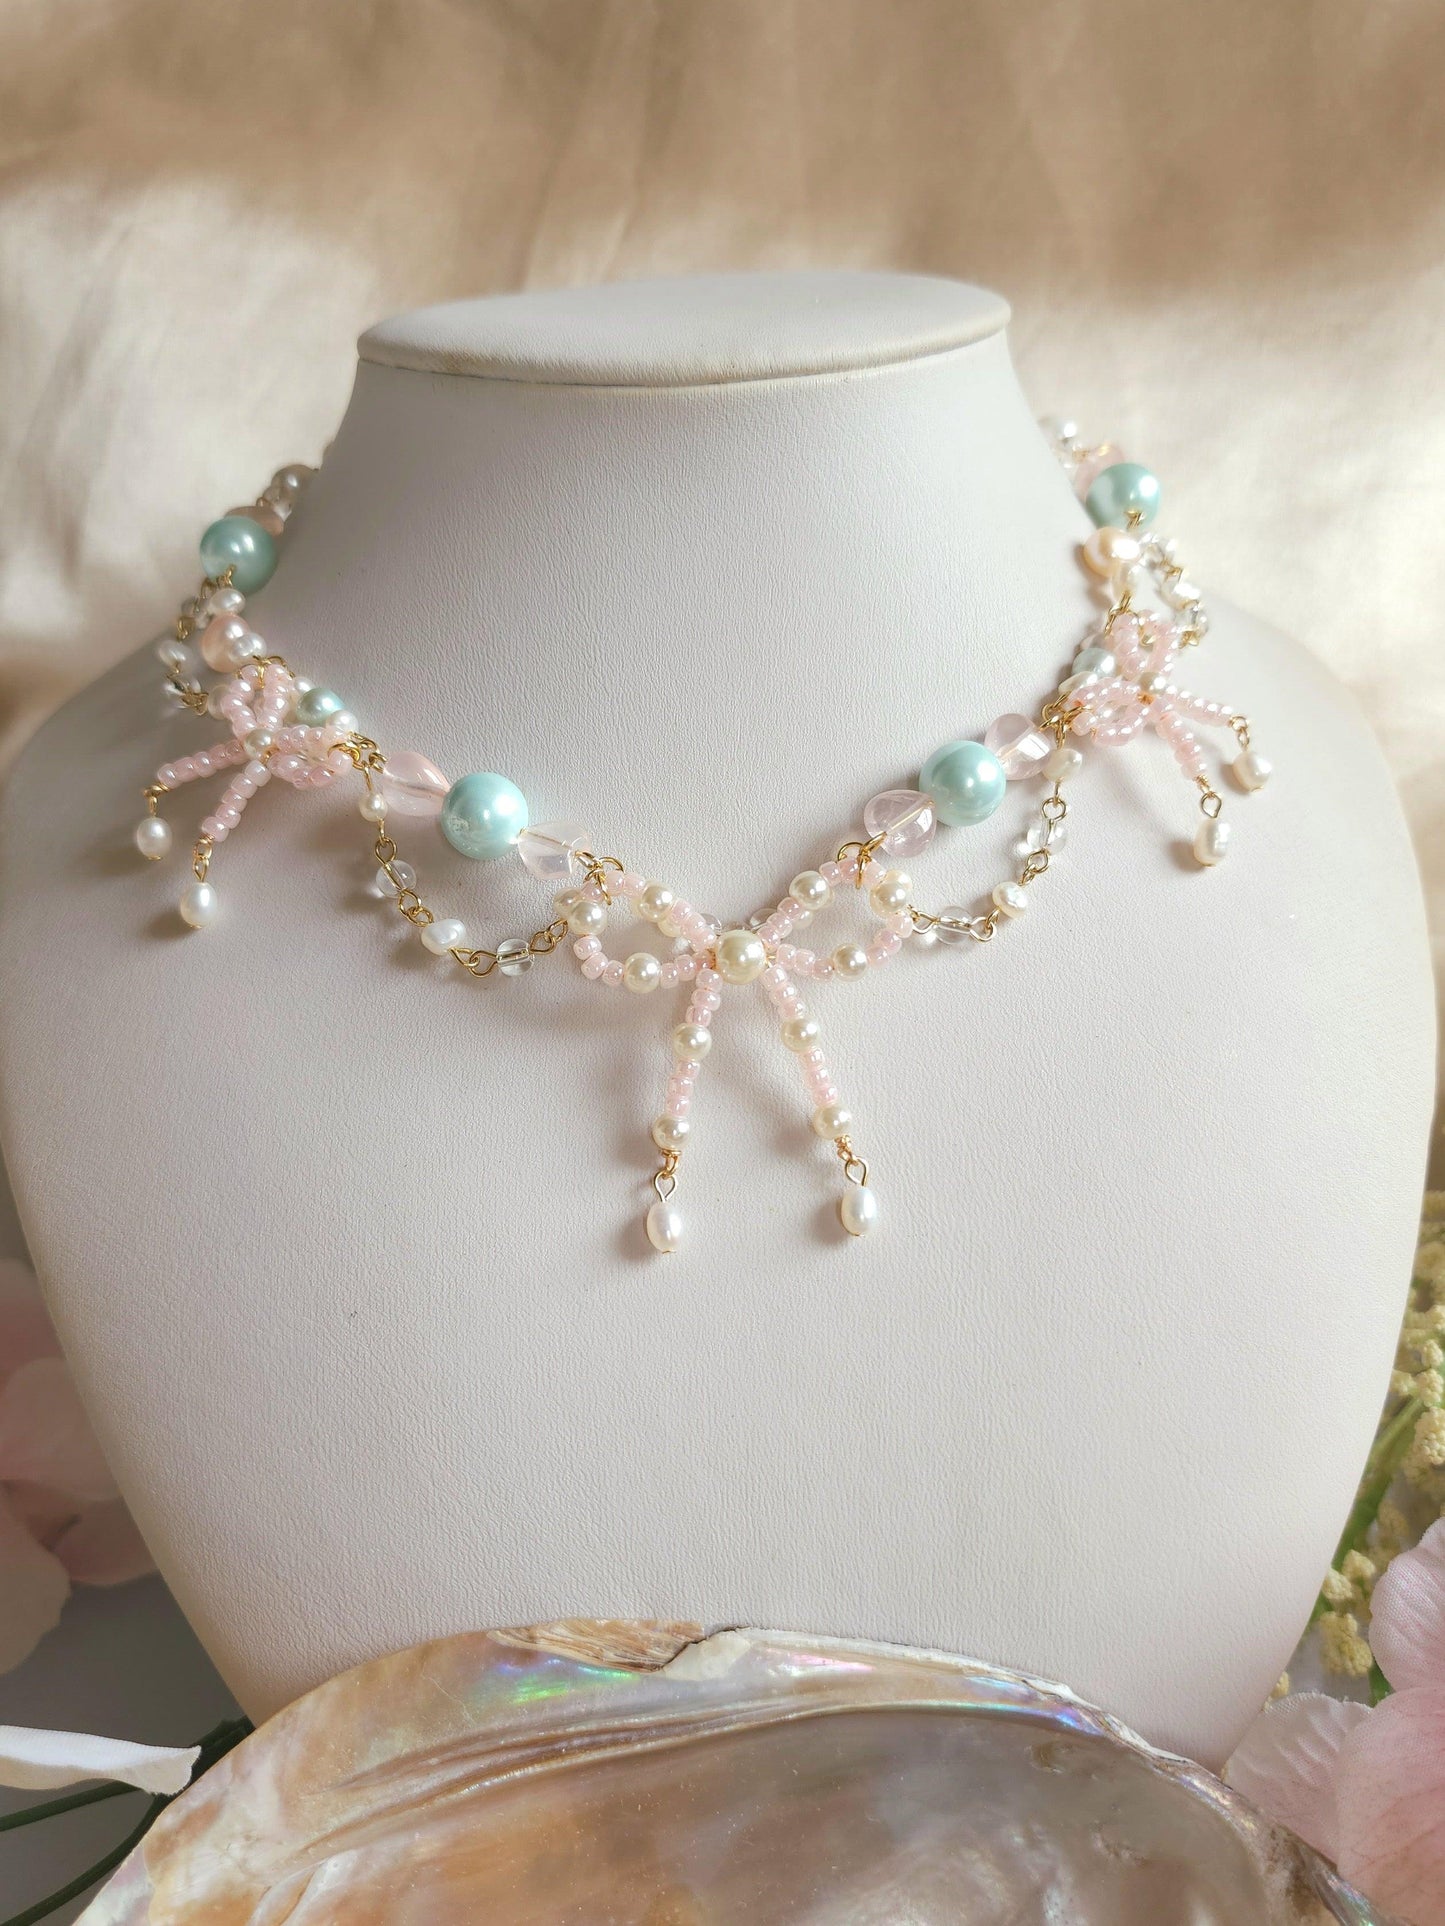 Dreamy Tides Ribbon Necklace - By Cocoyu